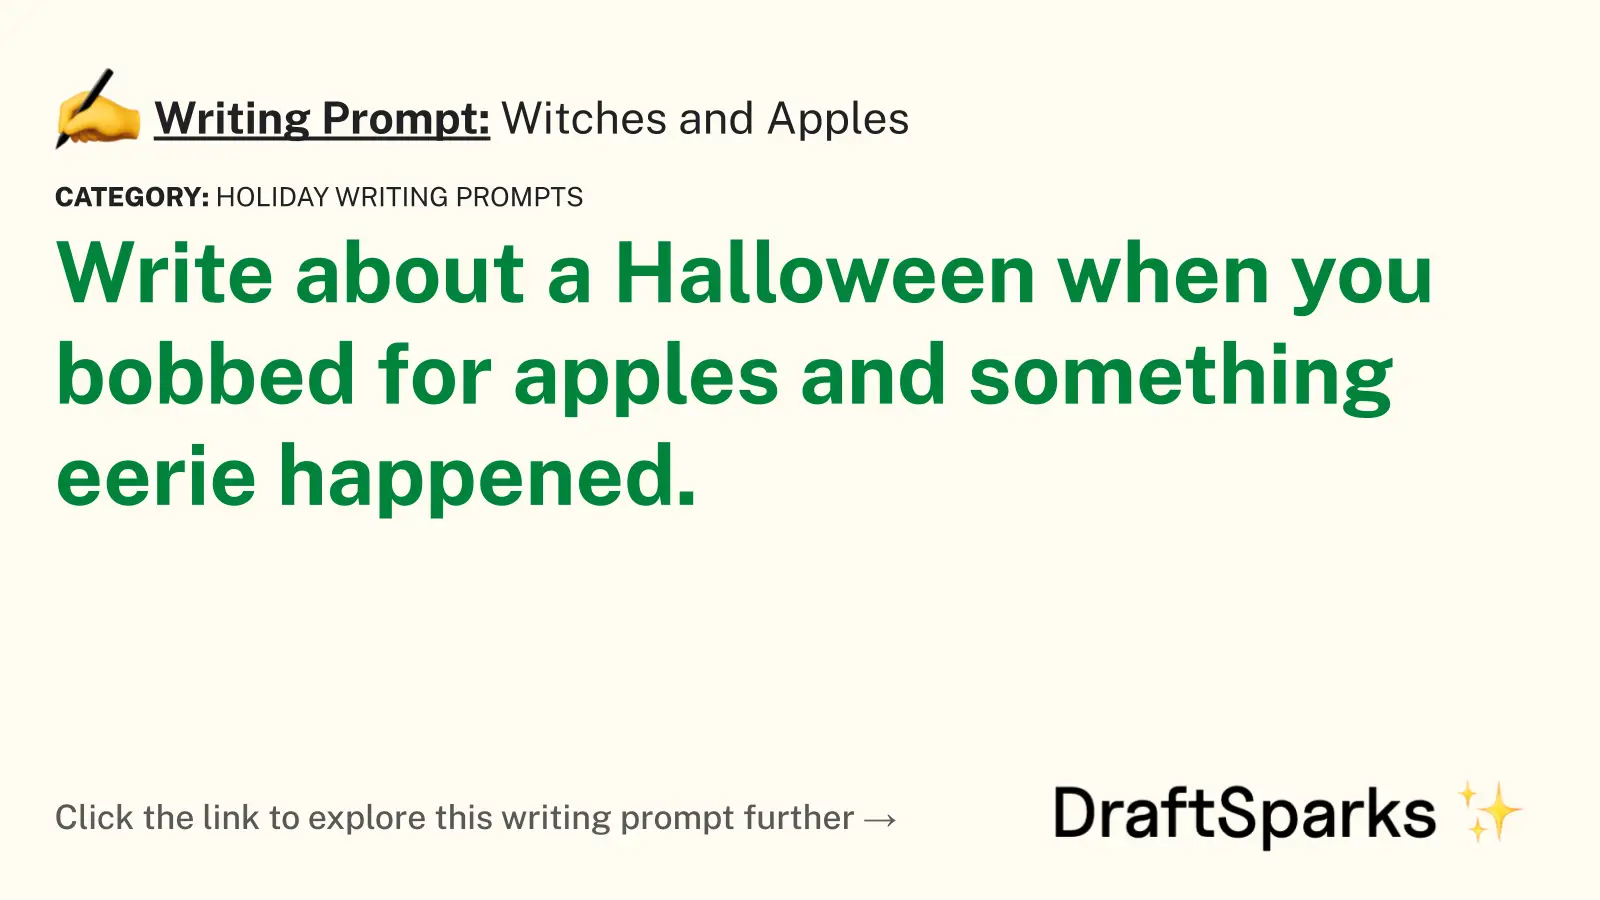 Witches and Apples